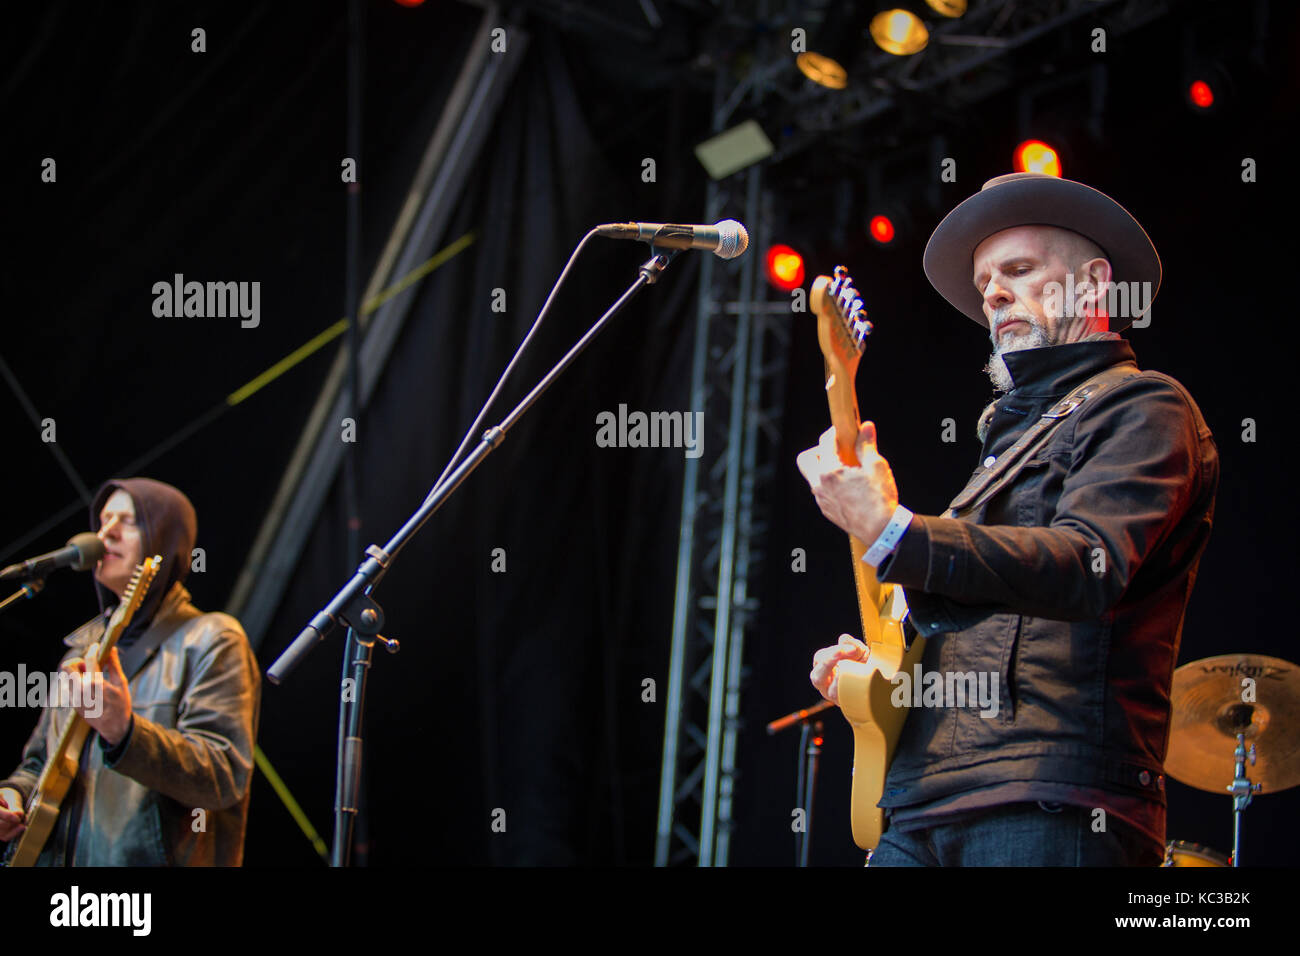 The American rock band Television performs a live concert at the Norwegian music festival Bergenfest 2014. The band is considered influential in the development of the punk and alternative rock music with band members from the 1970’s New York rock scene. Here guitarist Jimmy Rip is pictured live on stage. Norway, 12/06 2014. Stock Photo